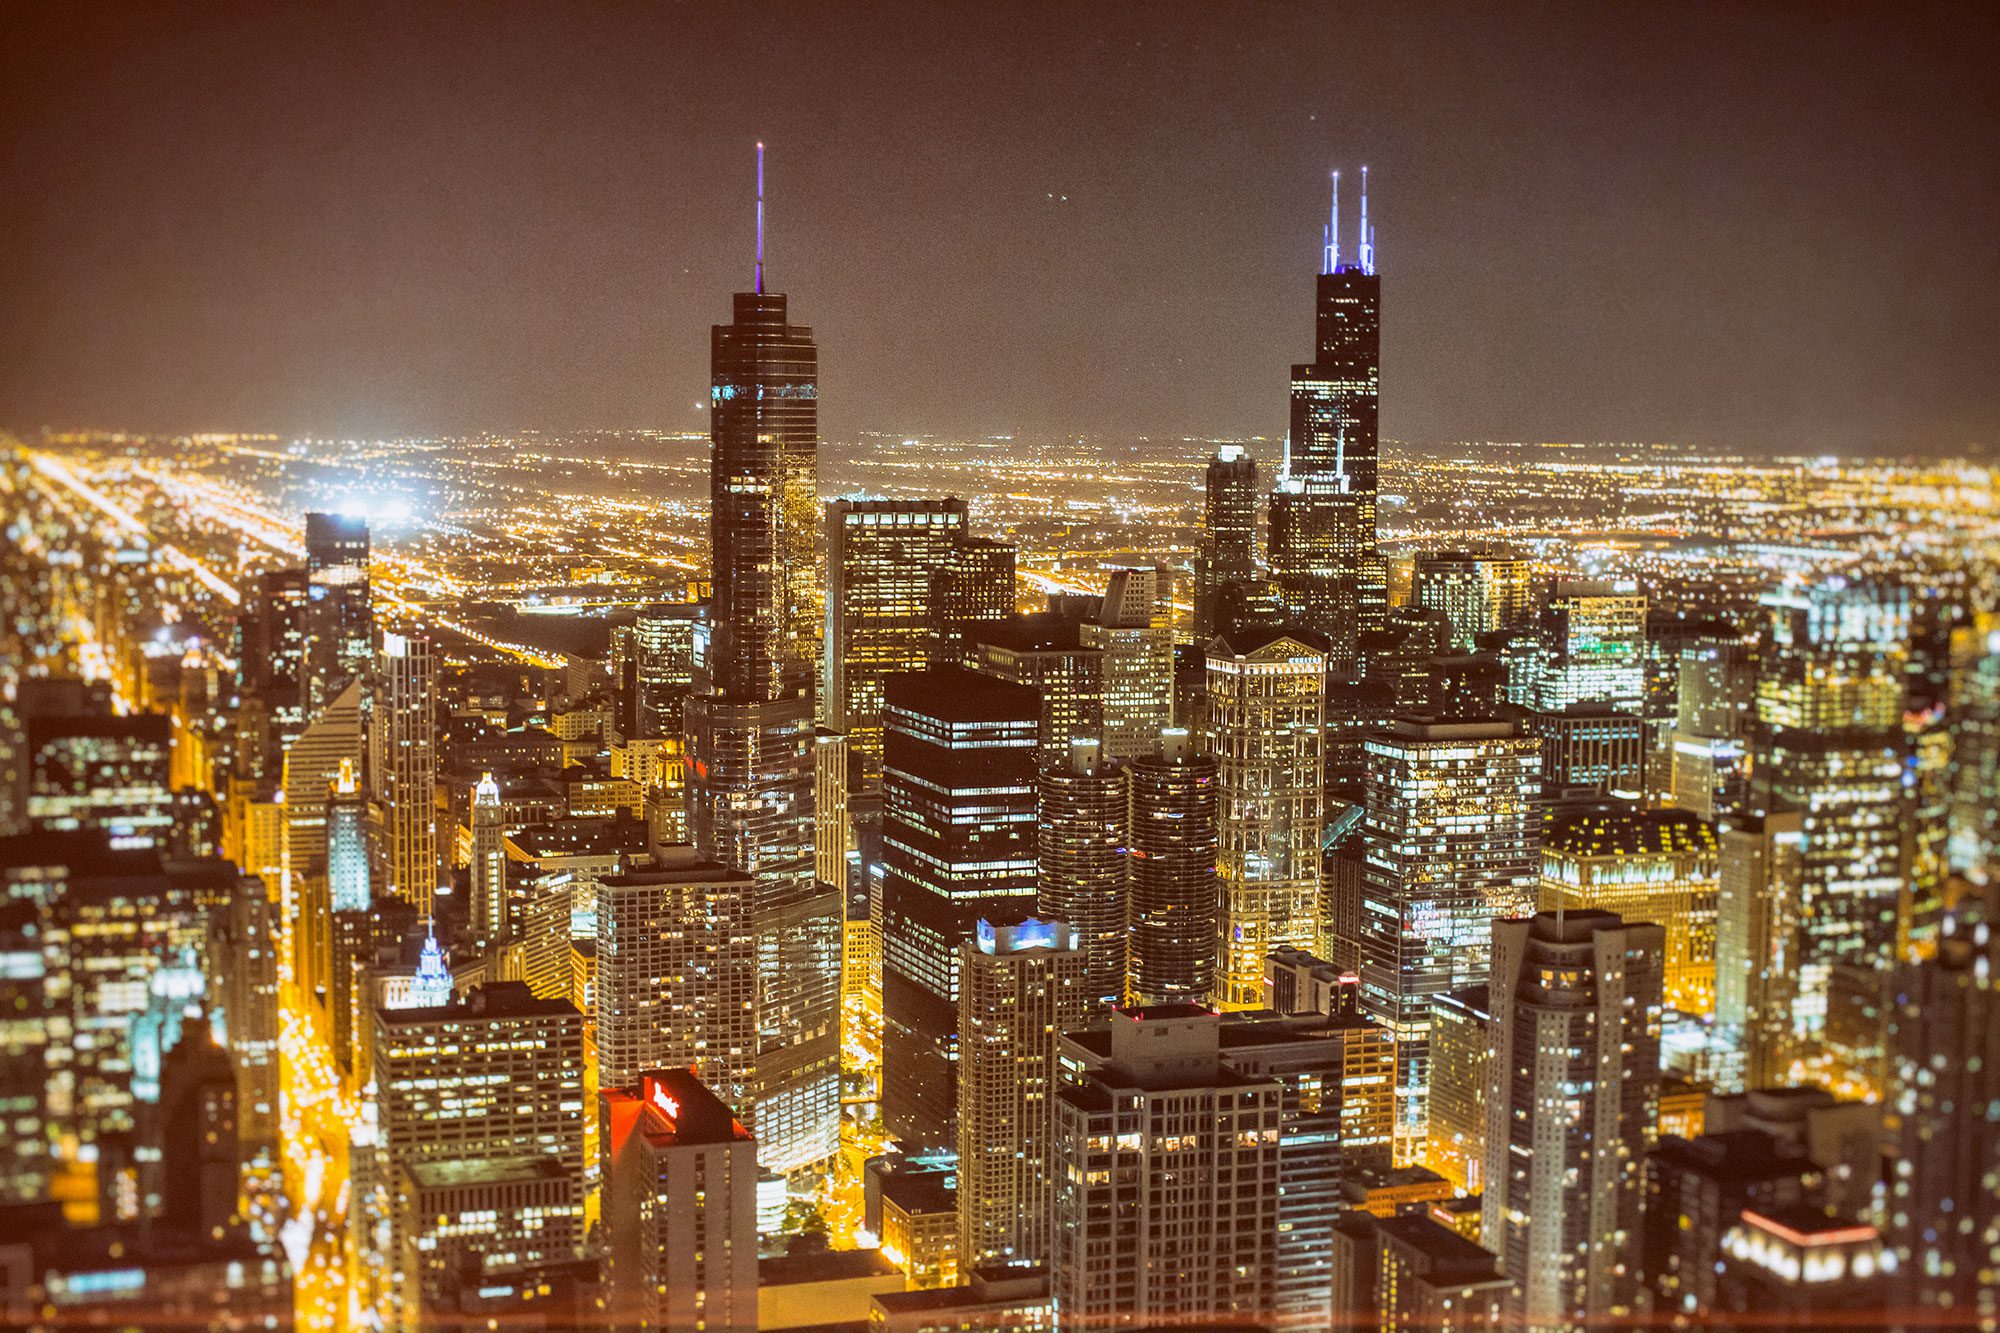 Chicago at night. Photo by Thomas Hawk/Creative Commons.